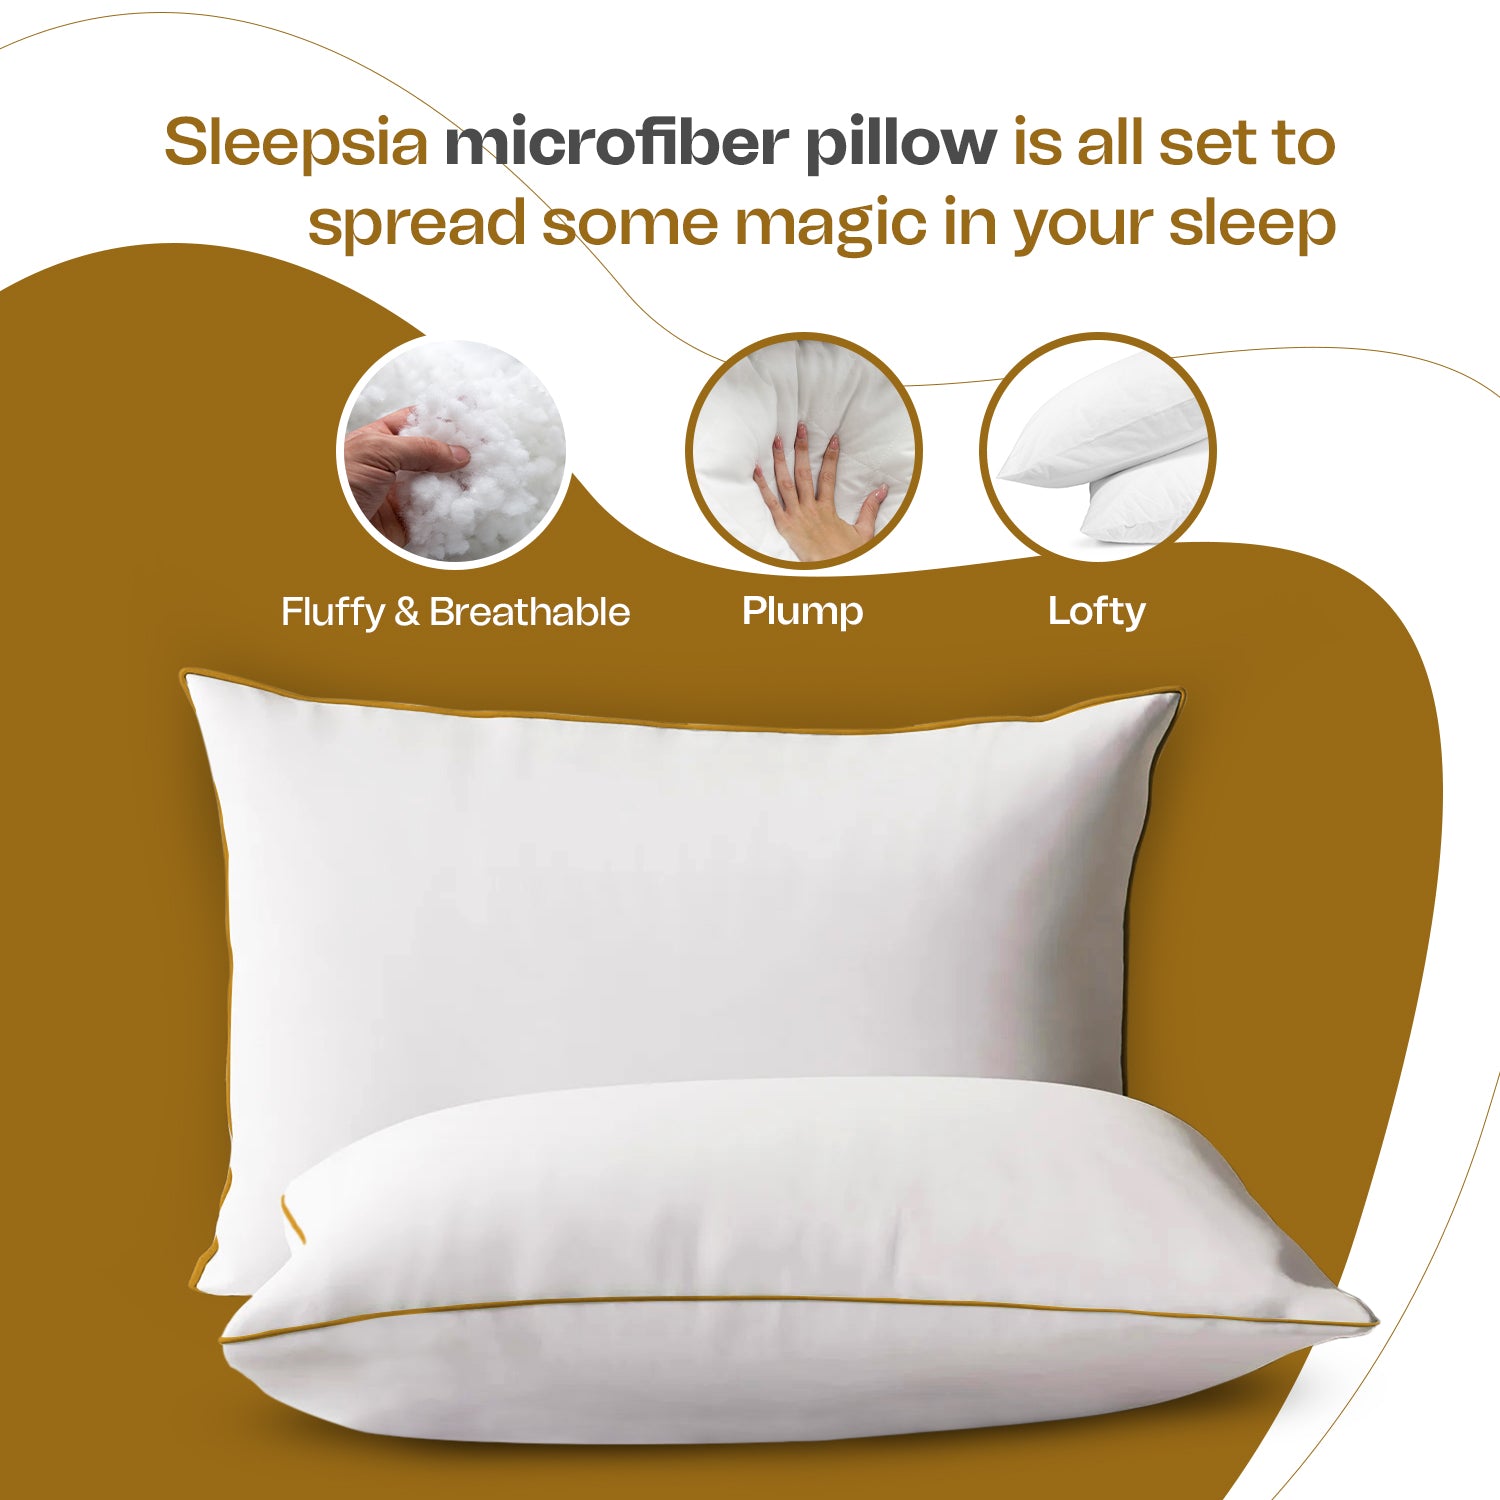 Super-Soft & Fluffy Microfiber Sleeping Pillow with Piping (Hotel Pillow)